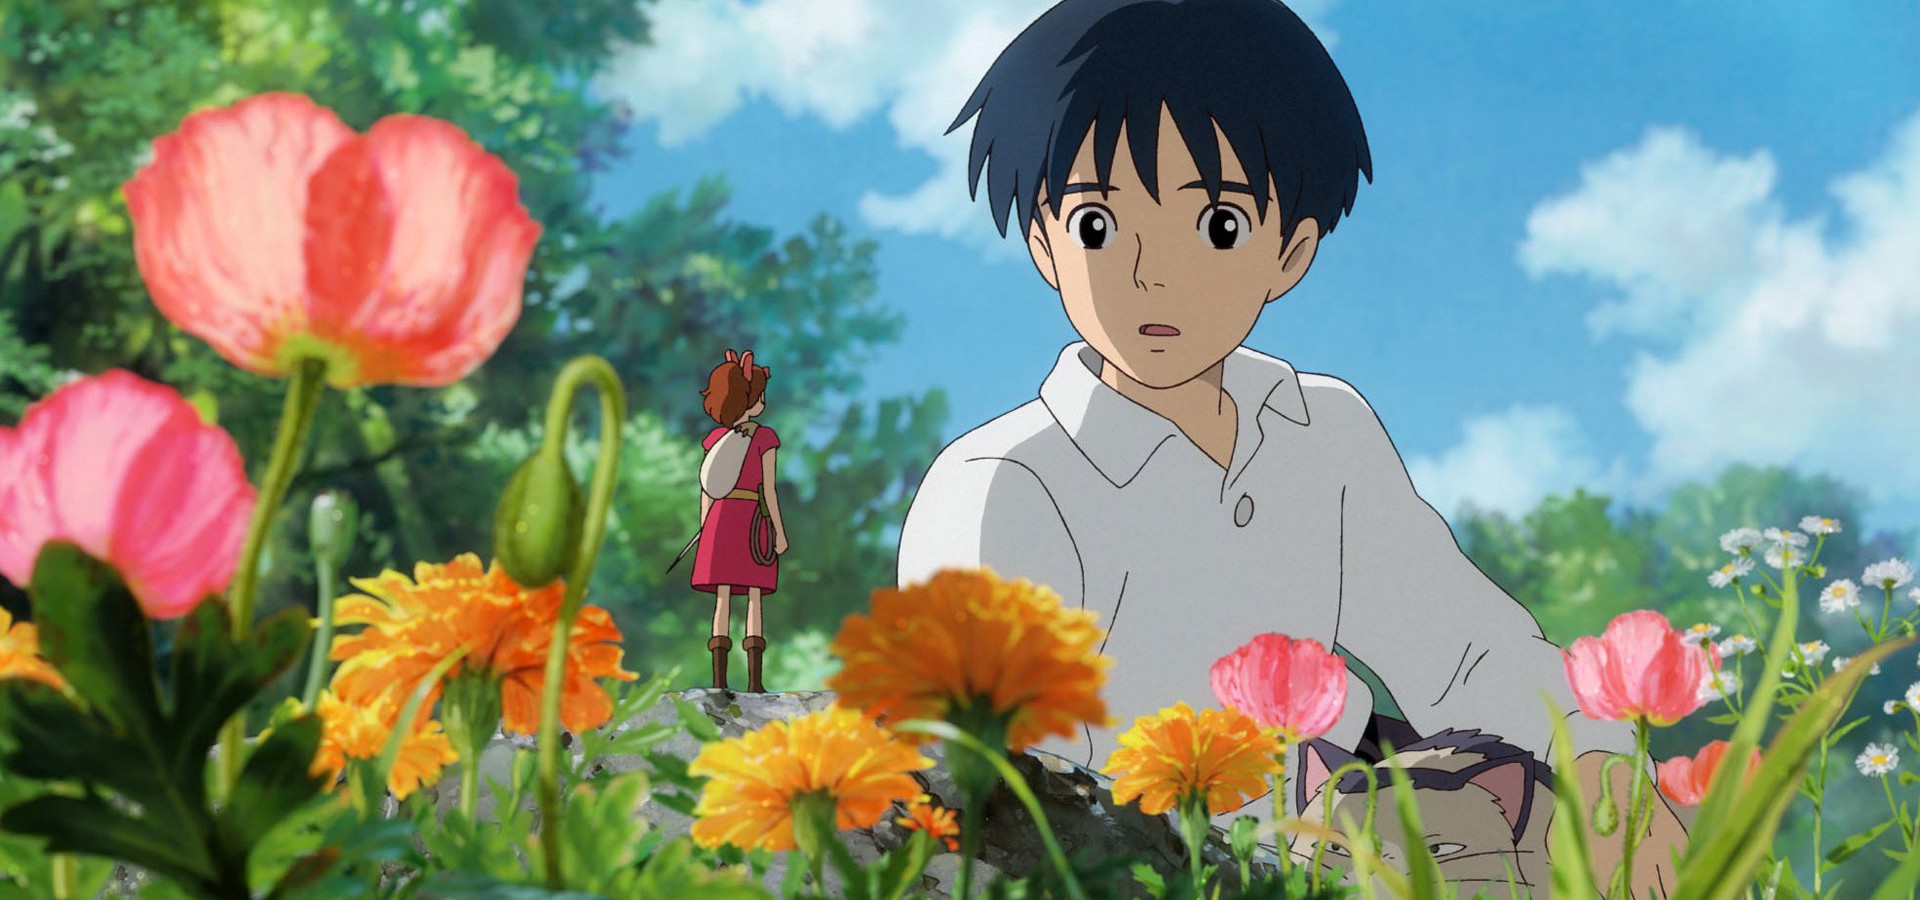 Streaming The Secret World Of Arrietty 2010 Full Movies Online